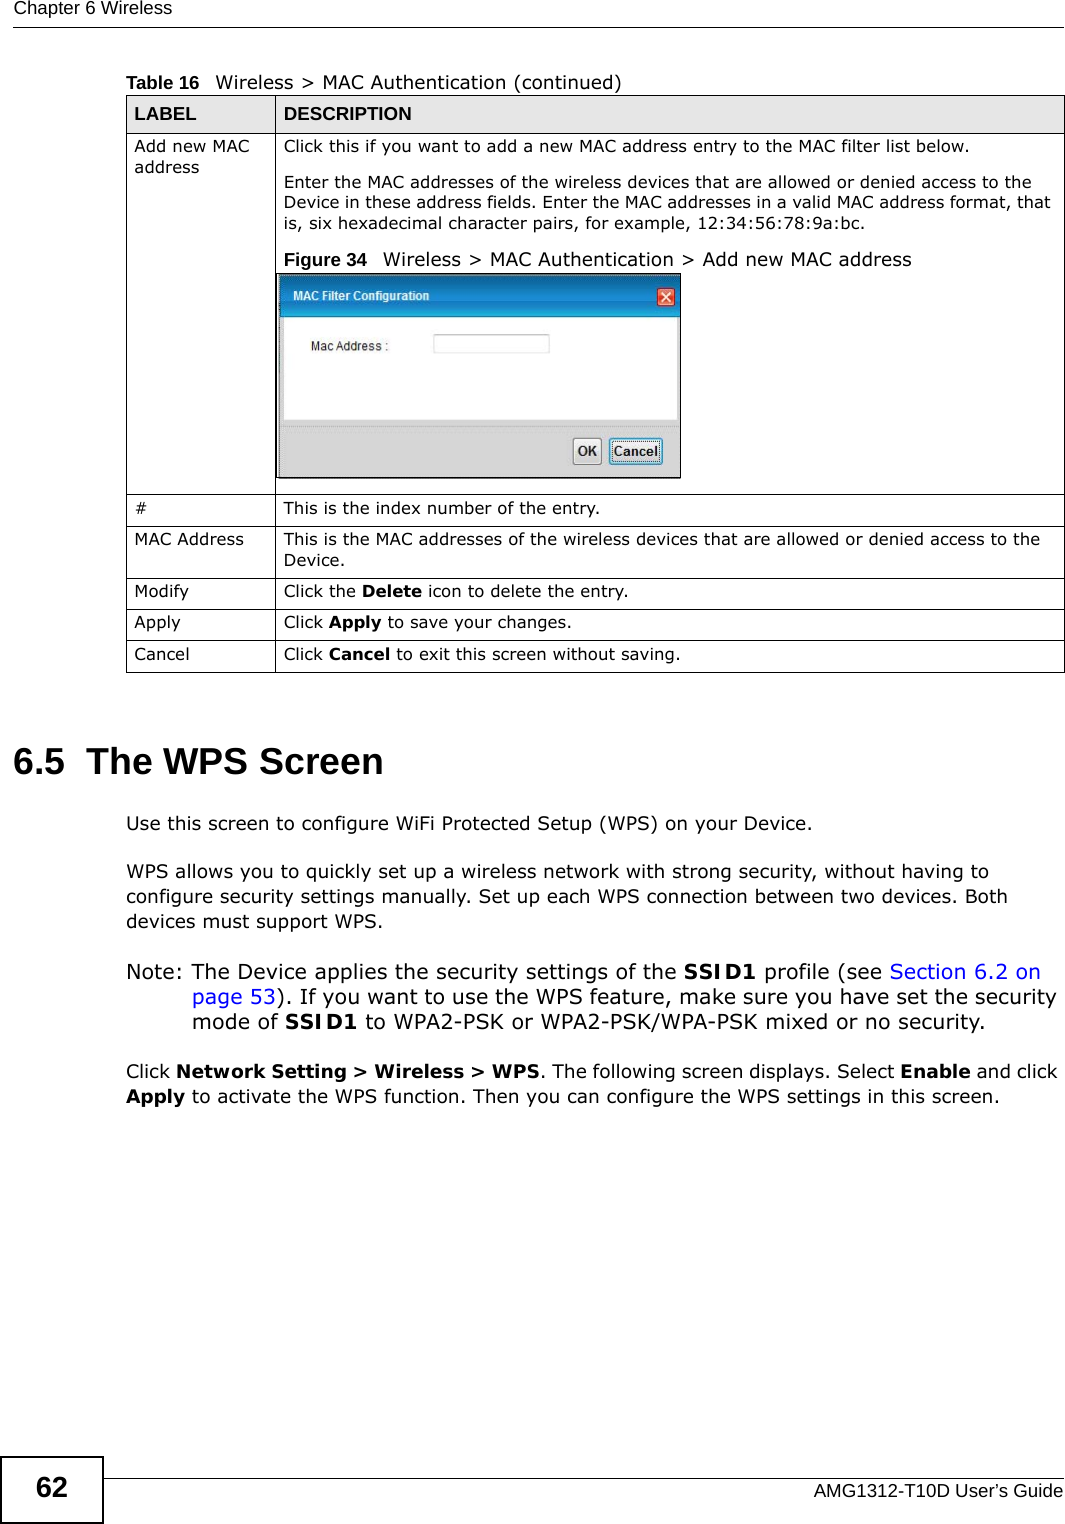 Chapter 6 WirelessAMG1312-T10D User’s Guide626.5  The WPS ScreenUse this screen to configure WiFi Protected Setup (WPS) on your Device.WPS allows you to quickly set up a wireless network with strong security, without having to configure security settings manually. Set up each WPS connection between two devices. Both devices must support WPS.Note: The Device applies the security settings of the SSID1 profile (see Section 6.2 on page 53). If you want to use the WPS feature, make sure you have set the security mode of SSID1 to WPA2-PSK or WPA2-PSK/WPA-PSK mixed or no security.Click Network Setting &gt; Wireless &gt; WPS. The following screen displays. Select Enable and click Apply to activate the WPS function. Then you can configure the WPS settings in this screen. Add new MAC addressClick this if you want to add a new MAC address entry to the MAC filter list below.Enter the MAC addresses of the wireless devices that are allowed or denied access to the Device in these address fields. Enter the MAC addresses in a valid MAC address format, that is, six hexadecimal character pairs, for example, 12:34:56:78:9a:bc.Figure 34   Wireless &gt; MAC Authentication &gt; Add new MAC address# This is the index number of the entry.MAC Address This is the MAC addresses of the wireless devices that are allowed or denied access to the Device.Modify Click the Delete icon to delete the entry.Apply Click Apply to save your changes.Cancel Click Cancel to exit this screen without saving.Table 16   Wireless &gt; MAC Authentication (continued)LABEL DESCRIPTION